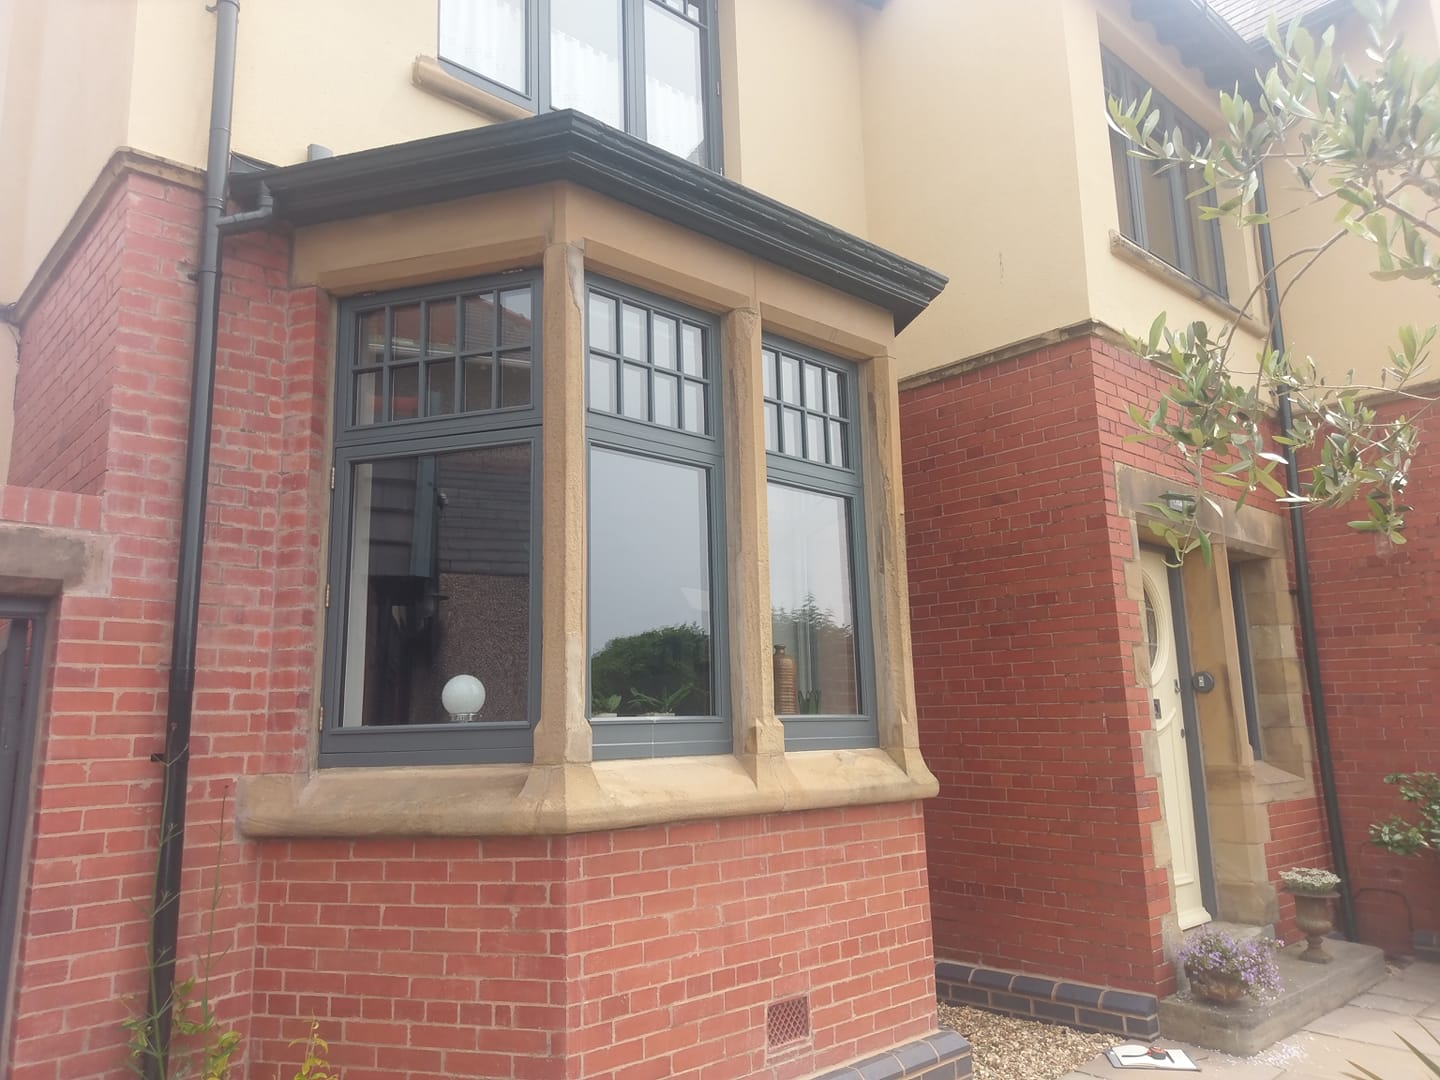 Our westkirby project underway making replacement sections to a sandstone window that has suffered damage due to cement repairs and exposure to the elements. North Wales, North West, Wirral, Liverpool & Cheshire UK